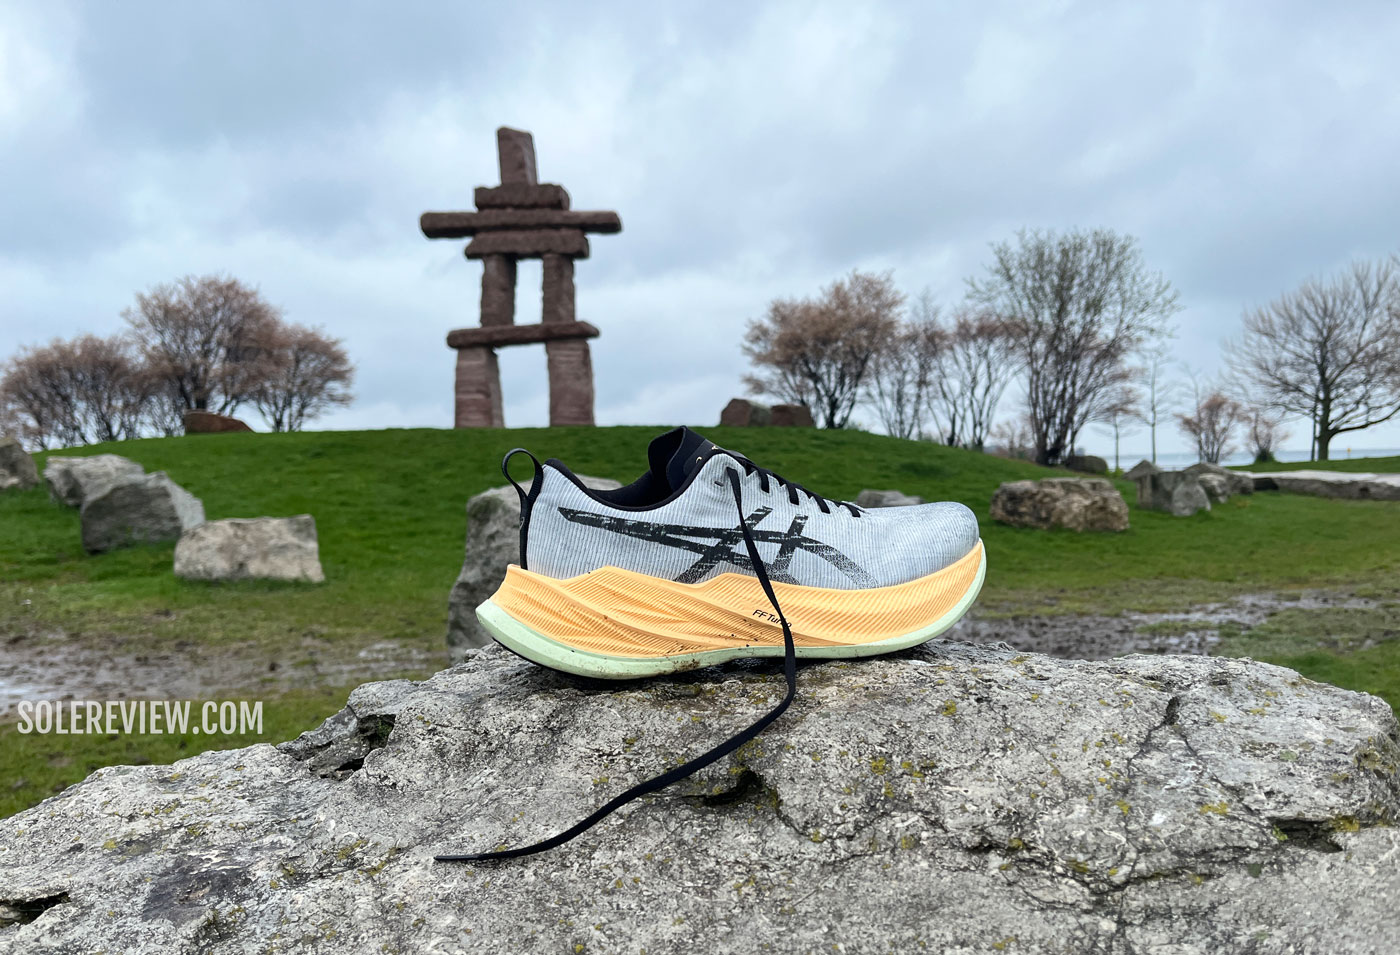 The Asics Superblast in the outdoors.